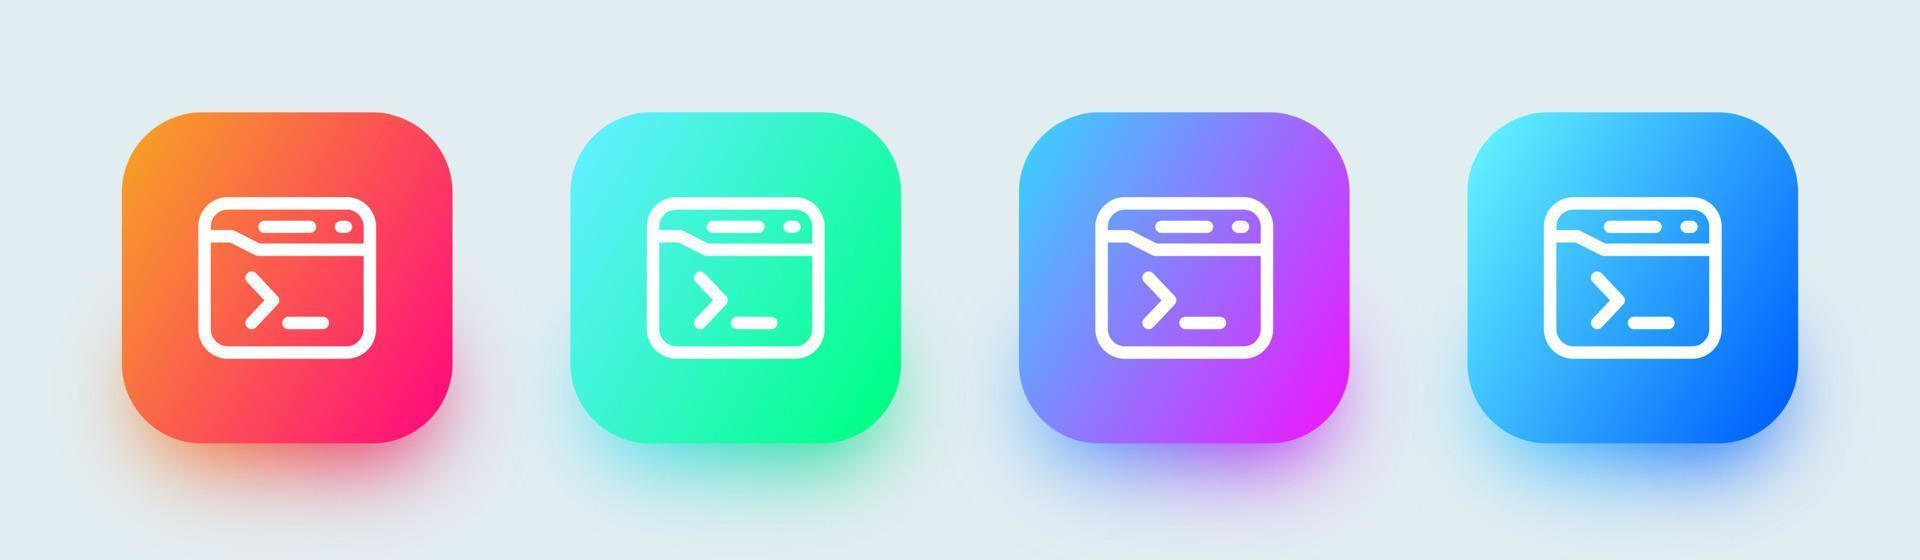 Terminal line icon in square gradient colors. Code signs vector illustration.